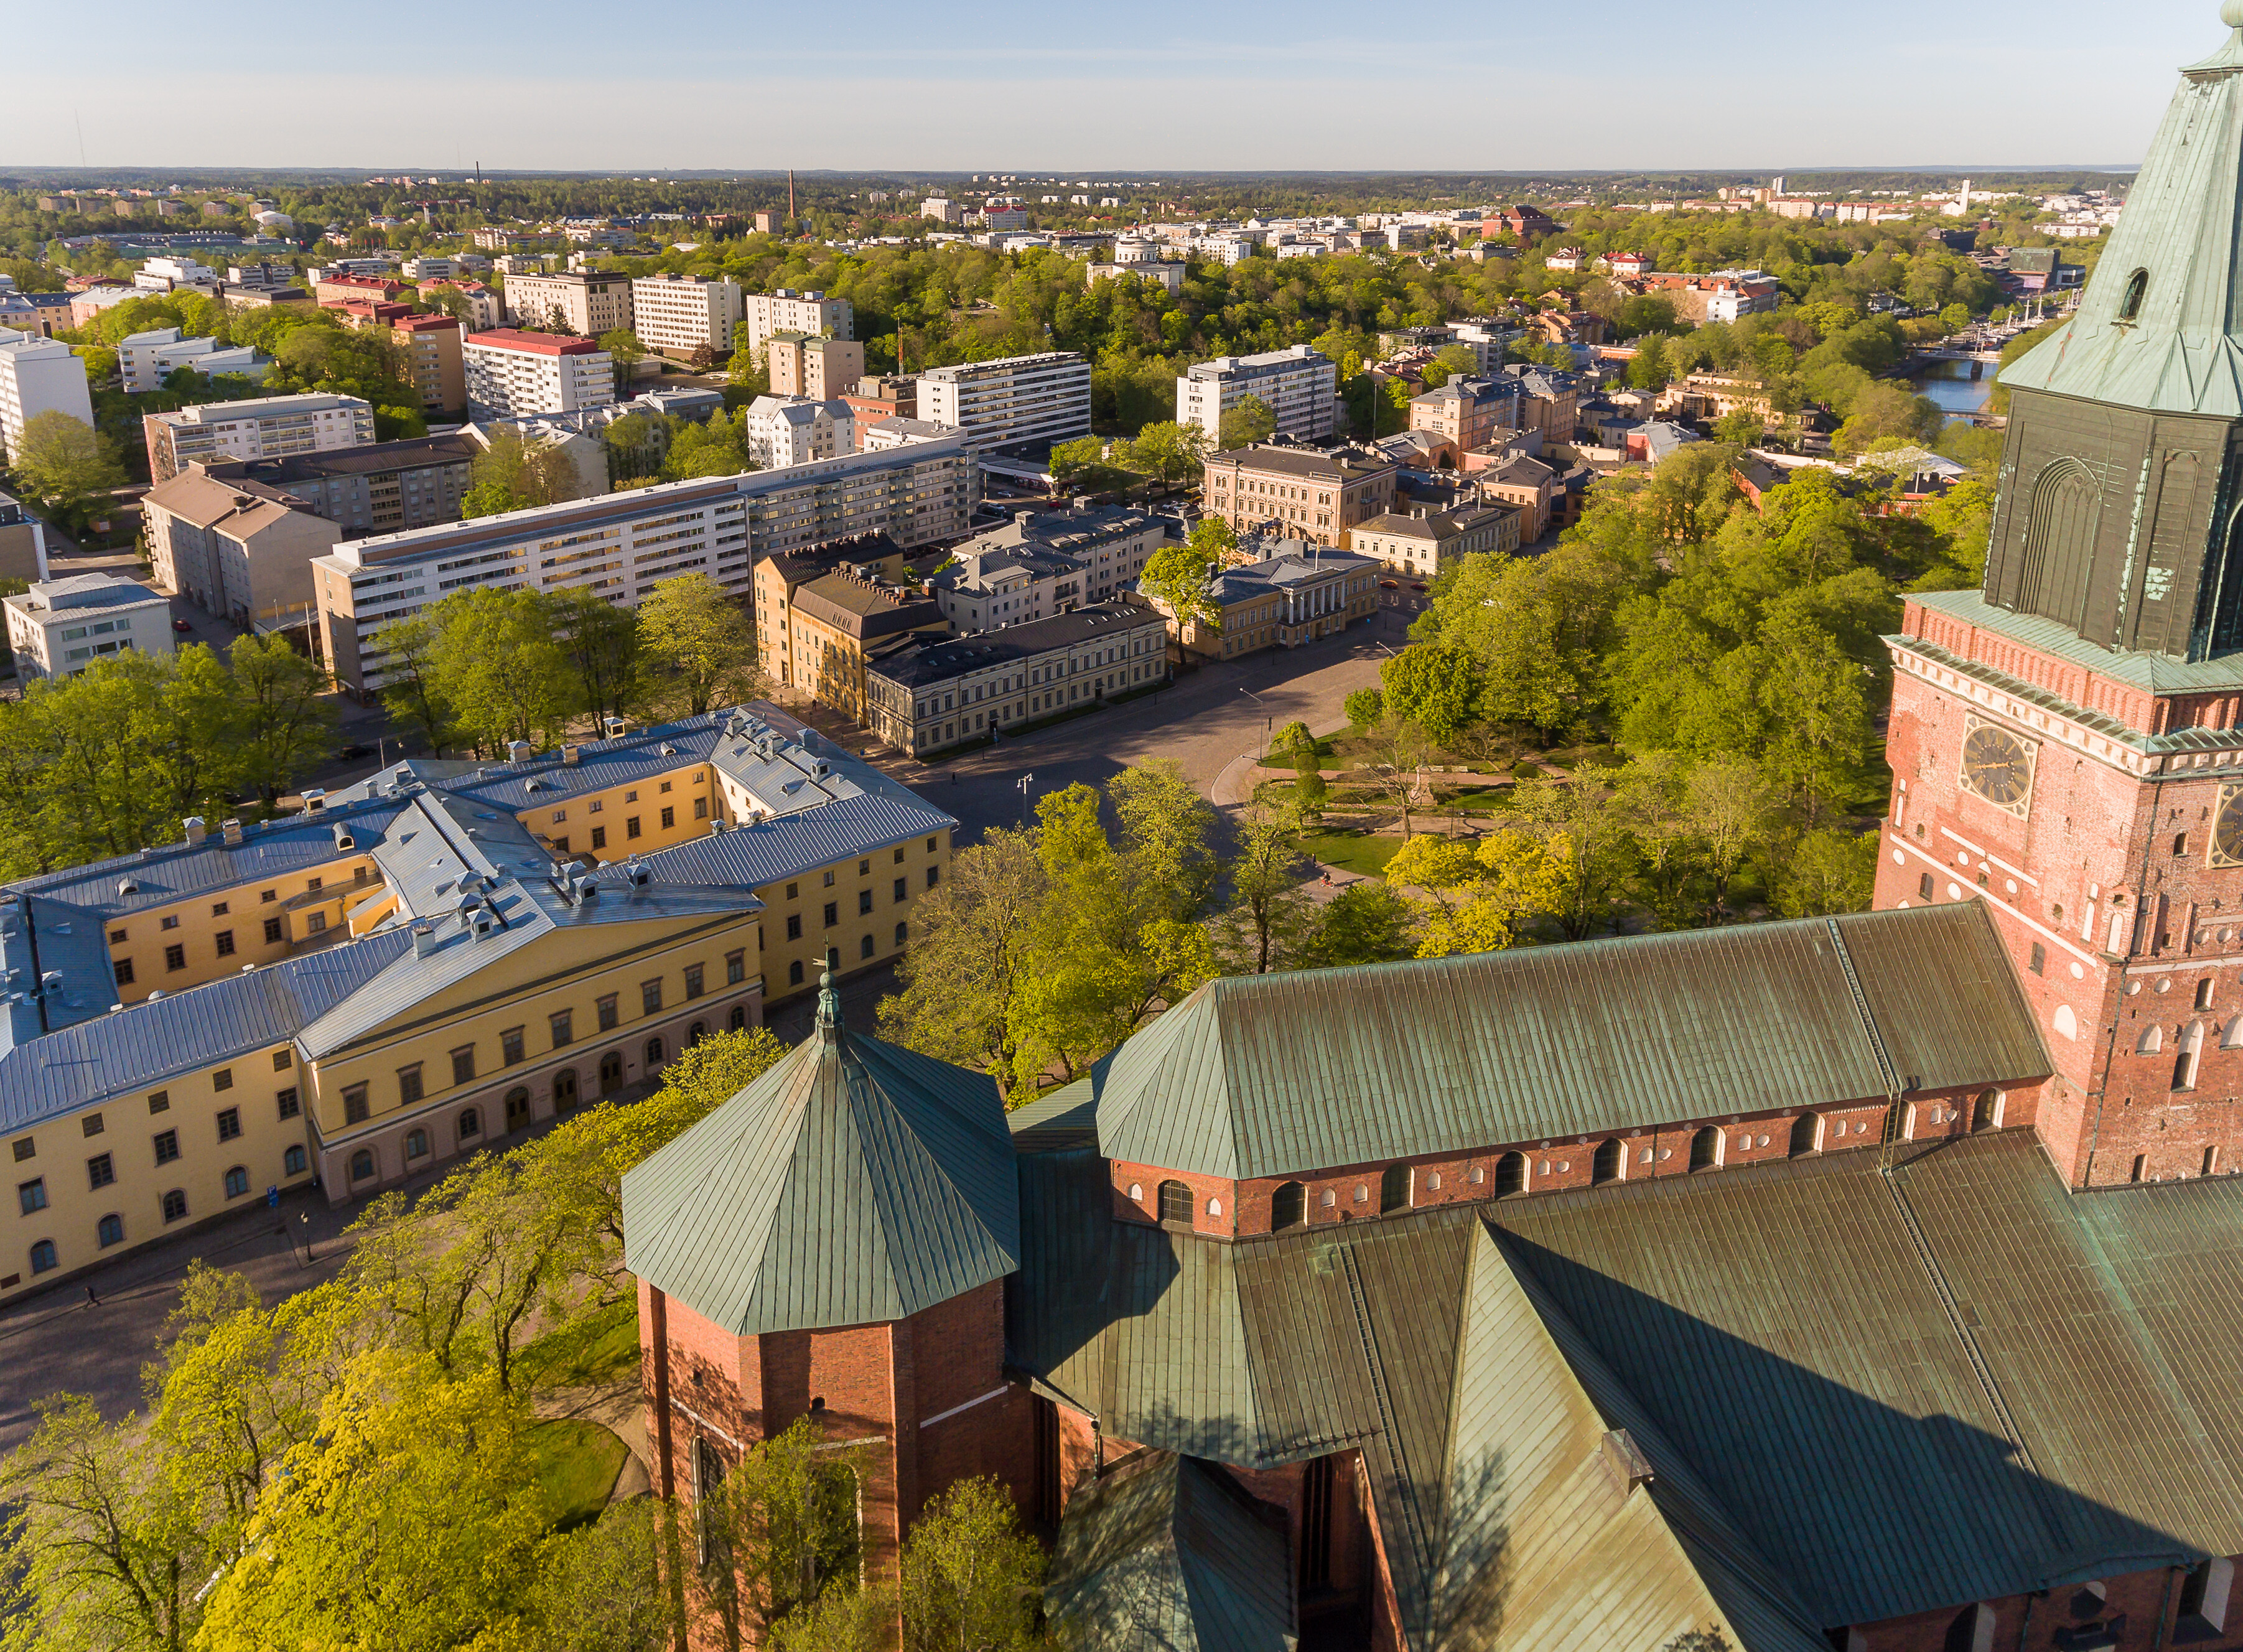 The city of Turku from above